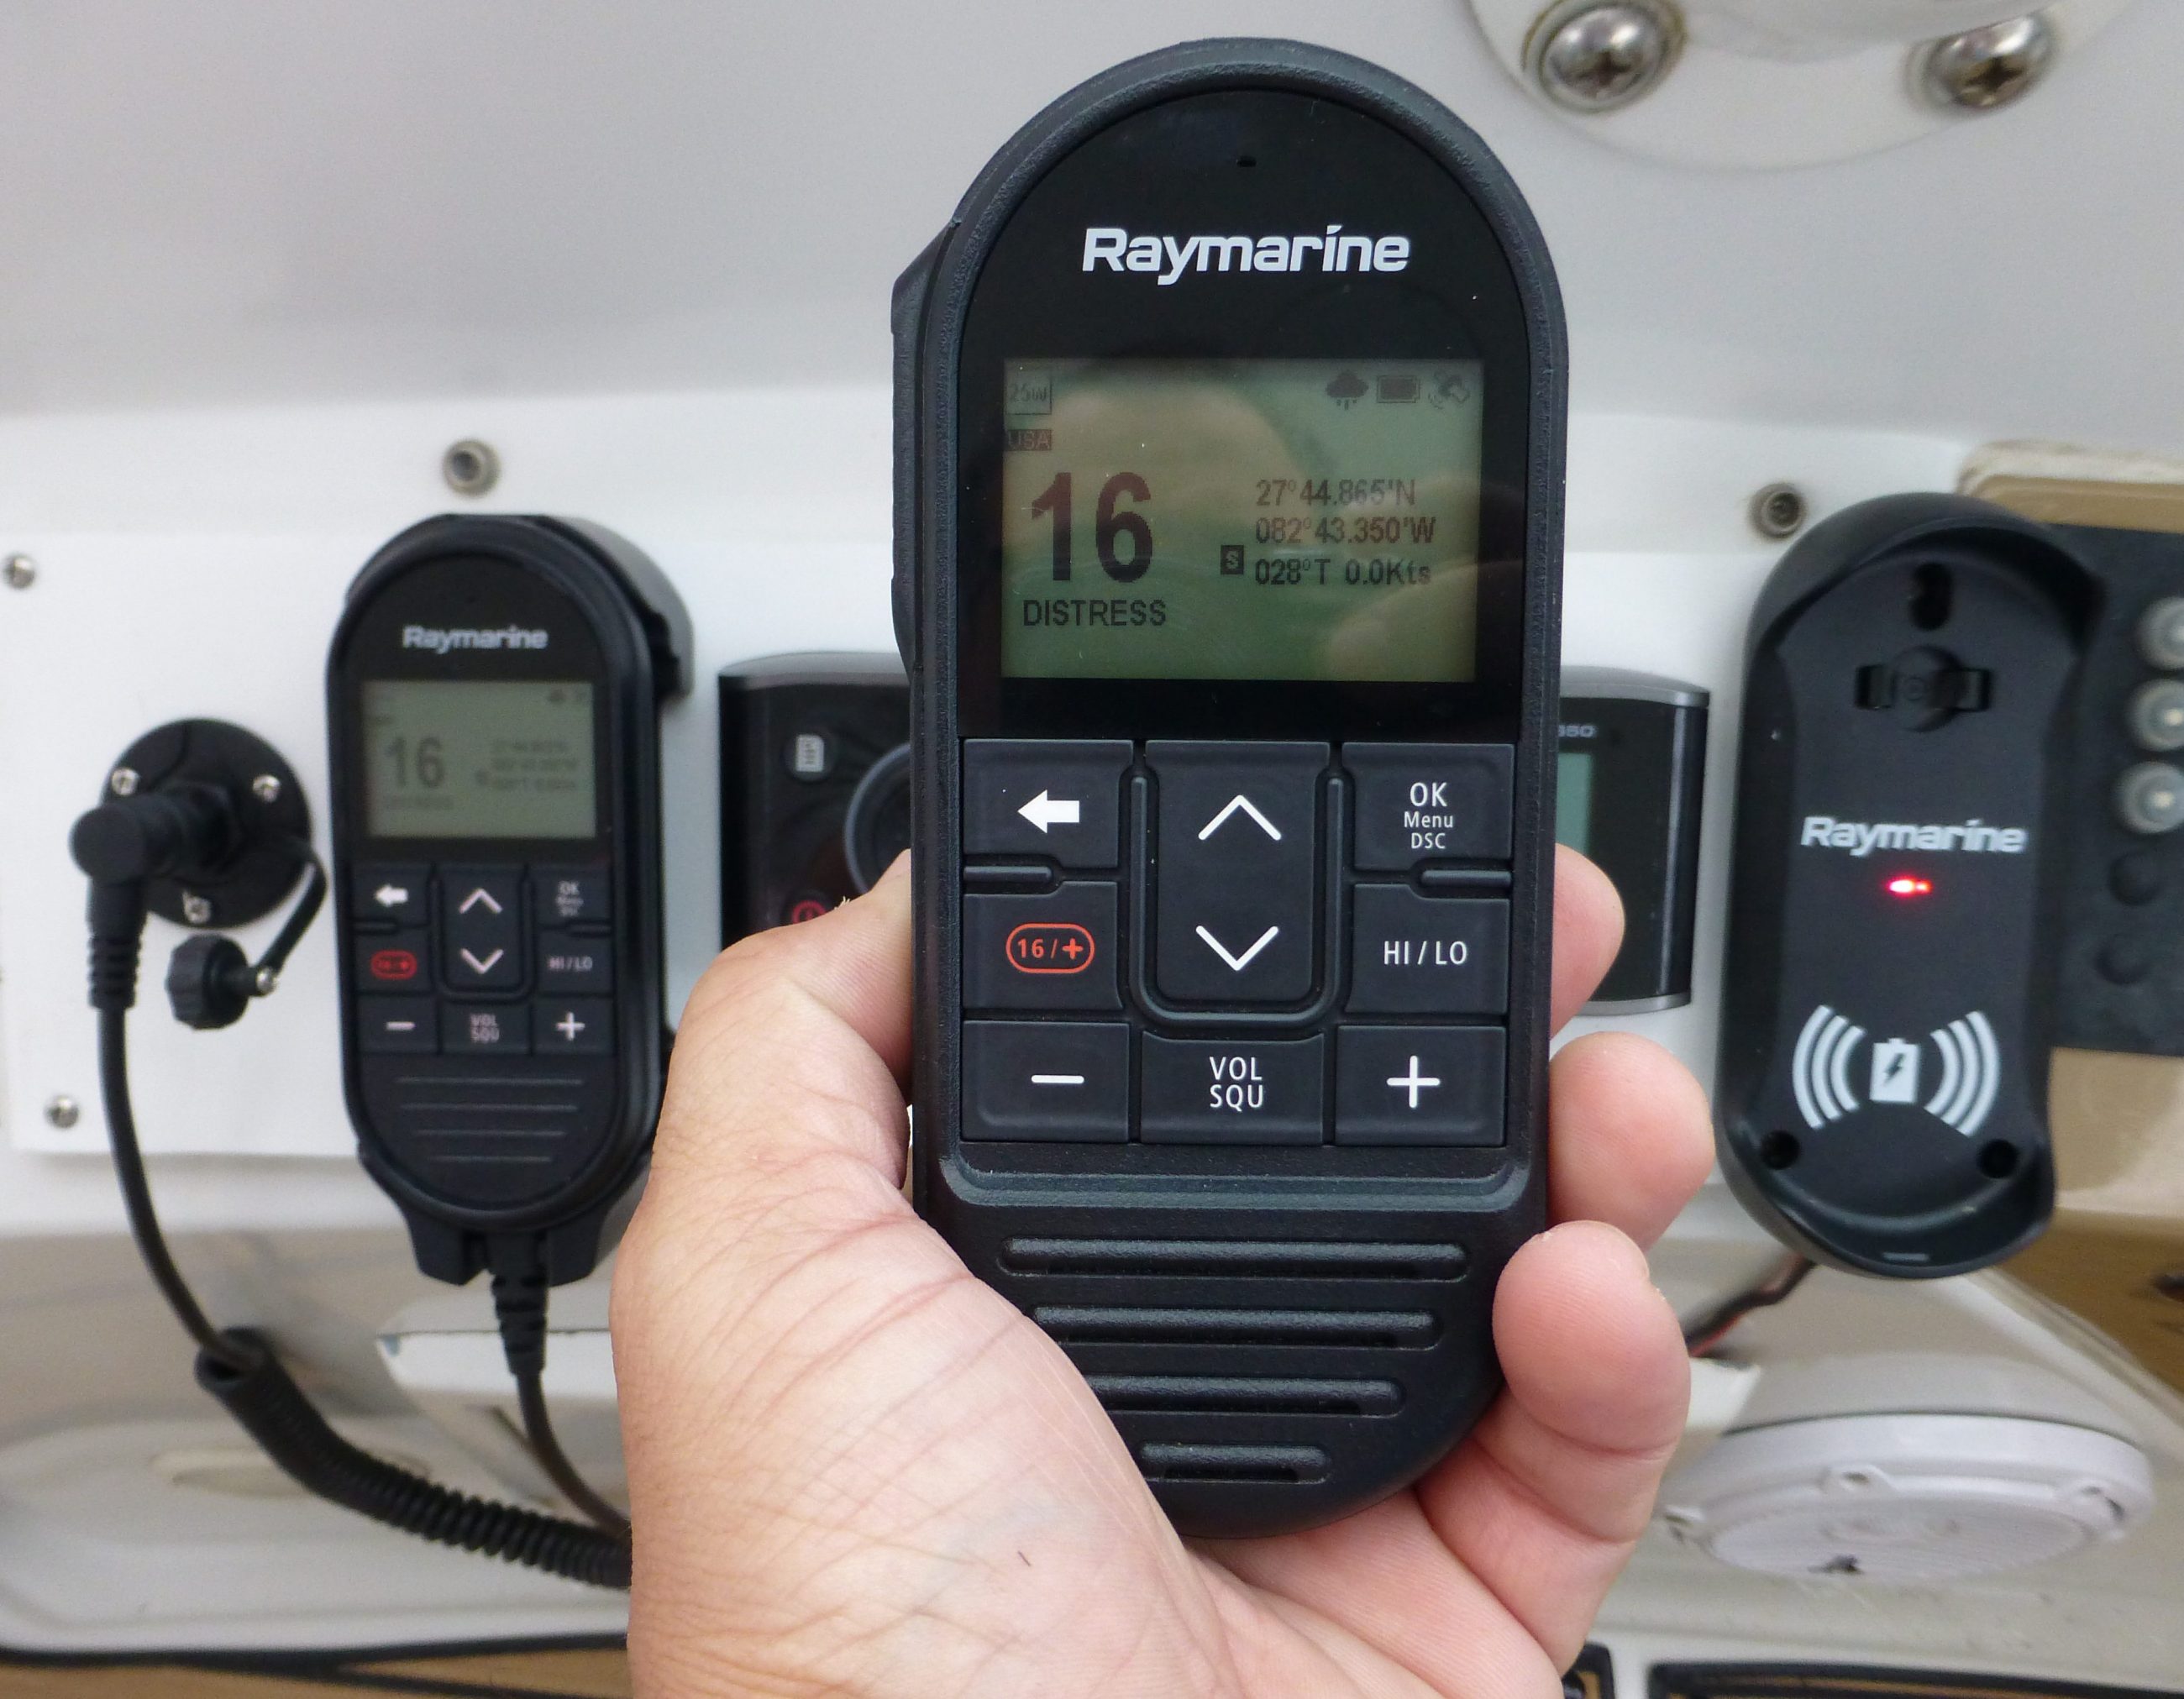 Raymarine Ray90, a full featured black box VHF radio with wireless handsets  and Bluetooth audio - Panbo